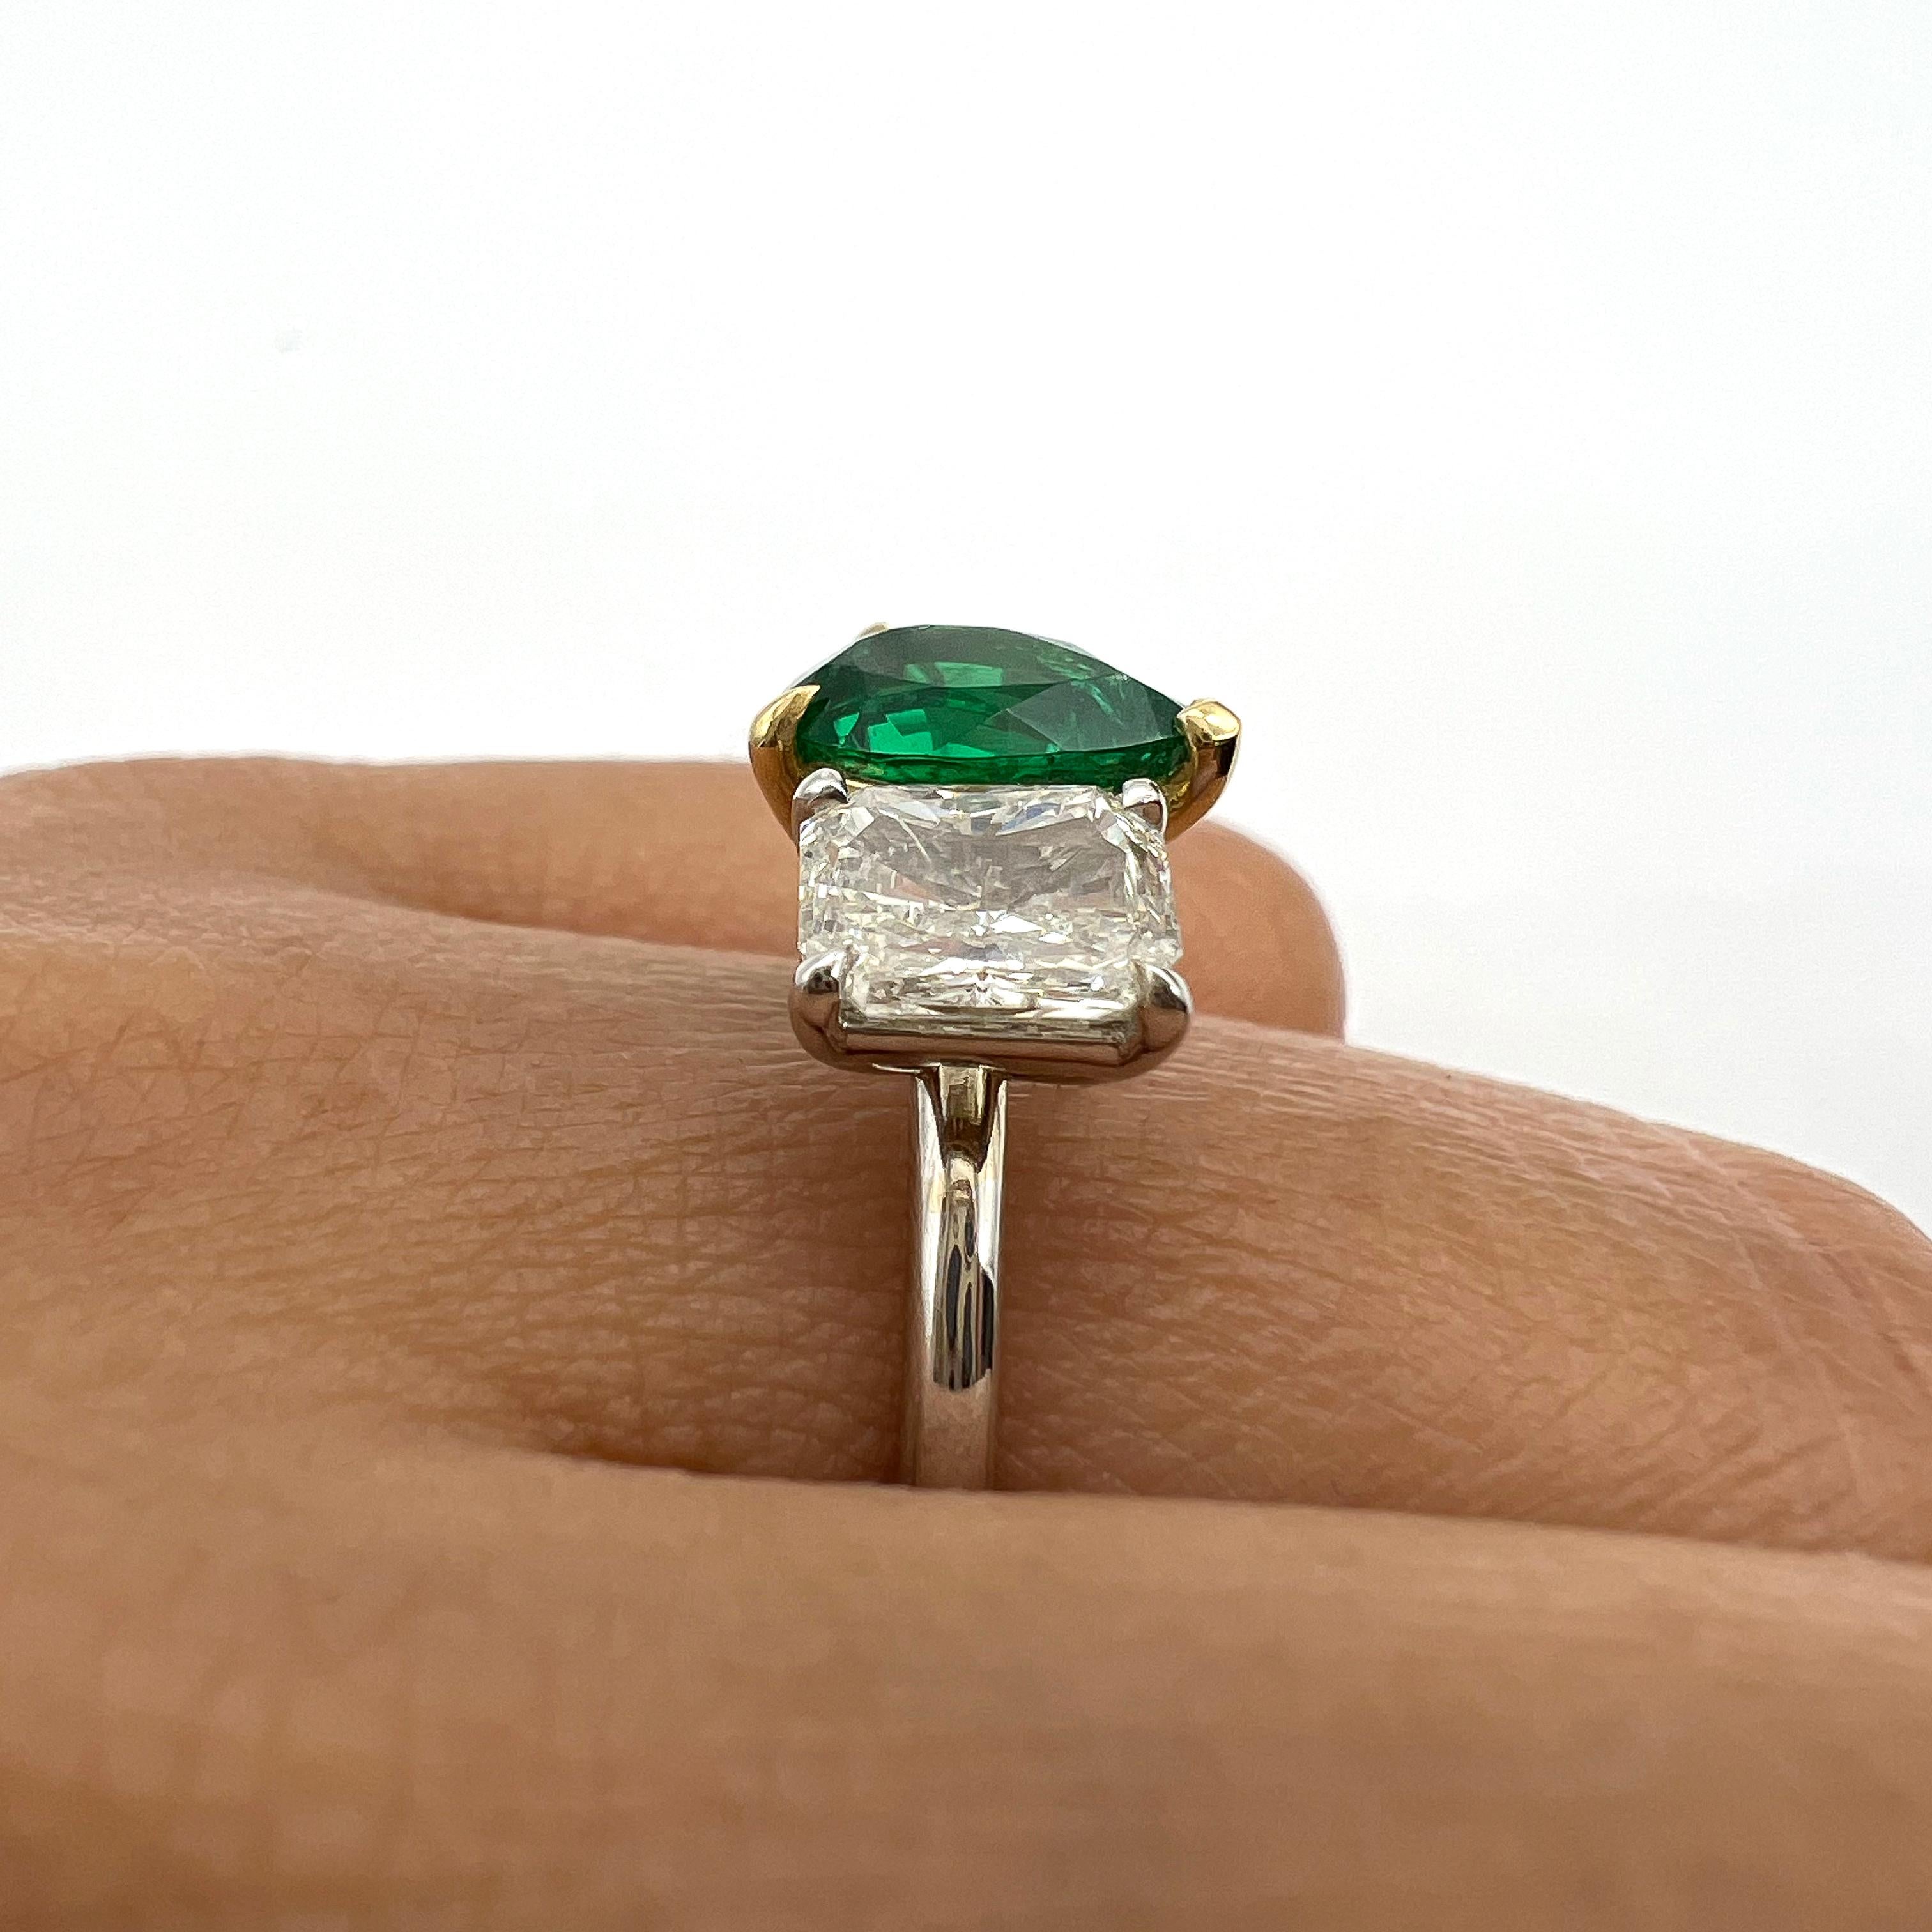 2.18 Total CT Two-Stone Emerald and Diamond Ladies Ring in 18K White Gold, GIA For Sale 3